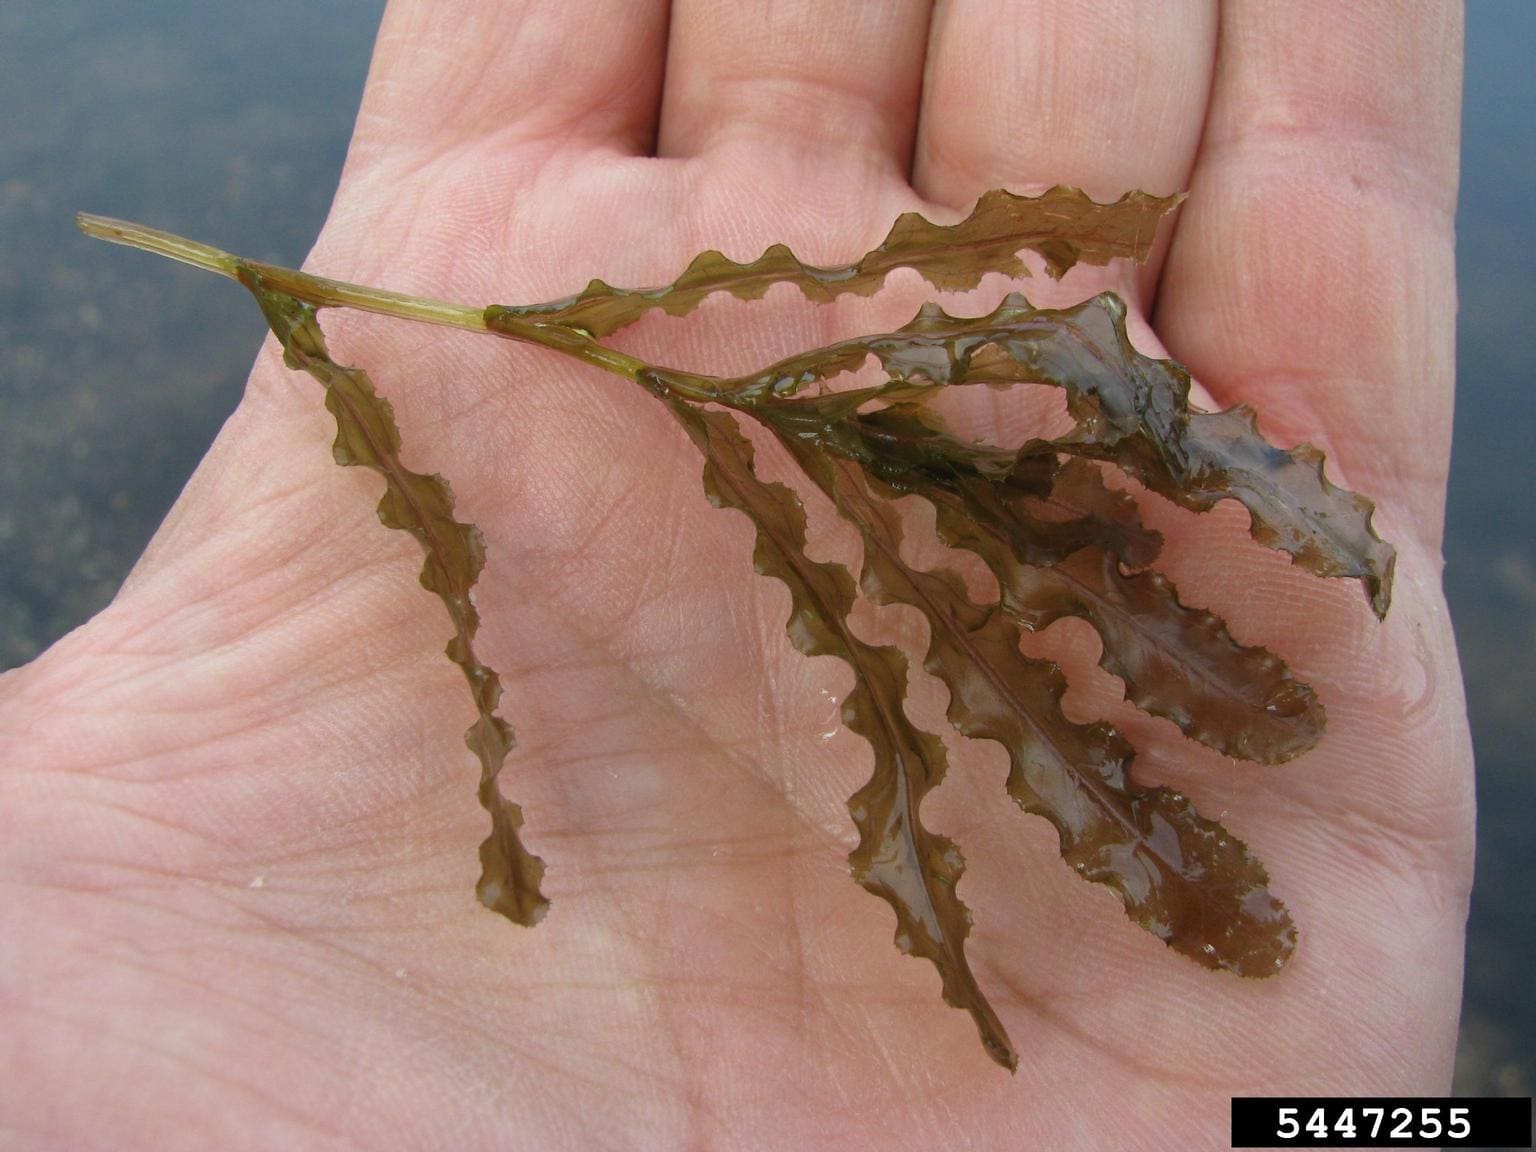 A person holding up their hand with seaweed on it.